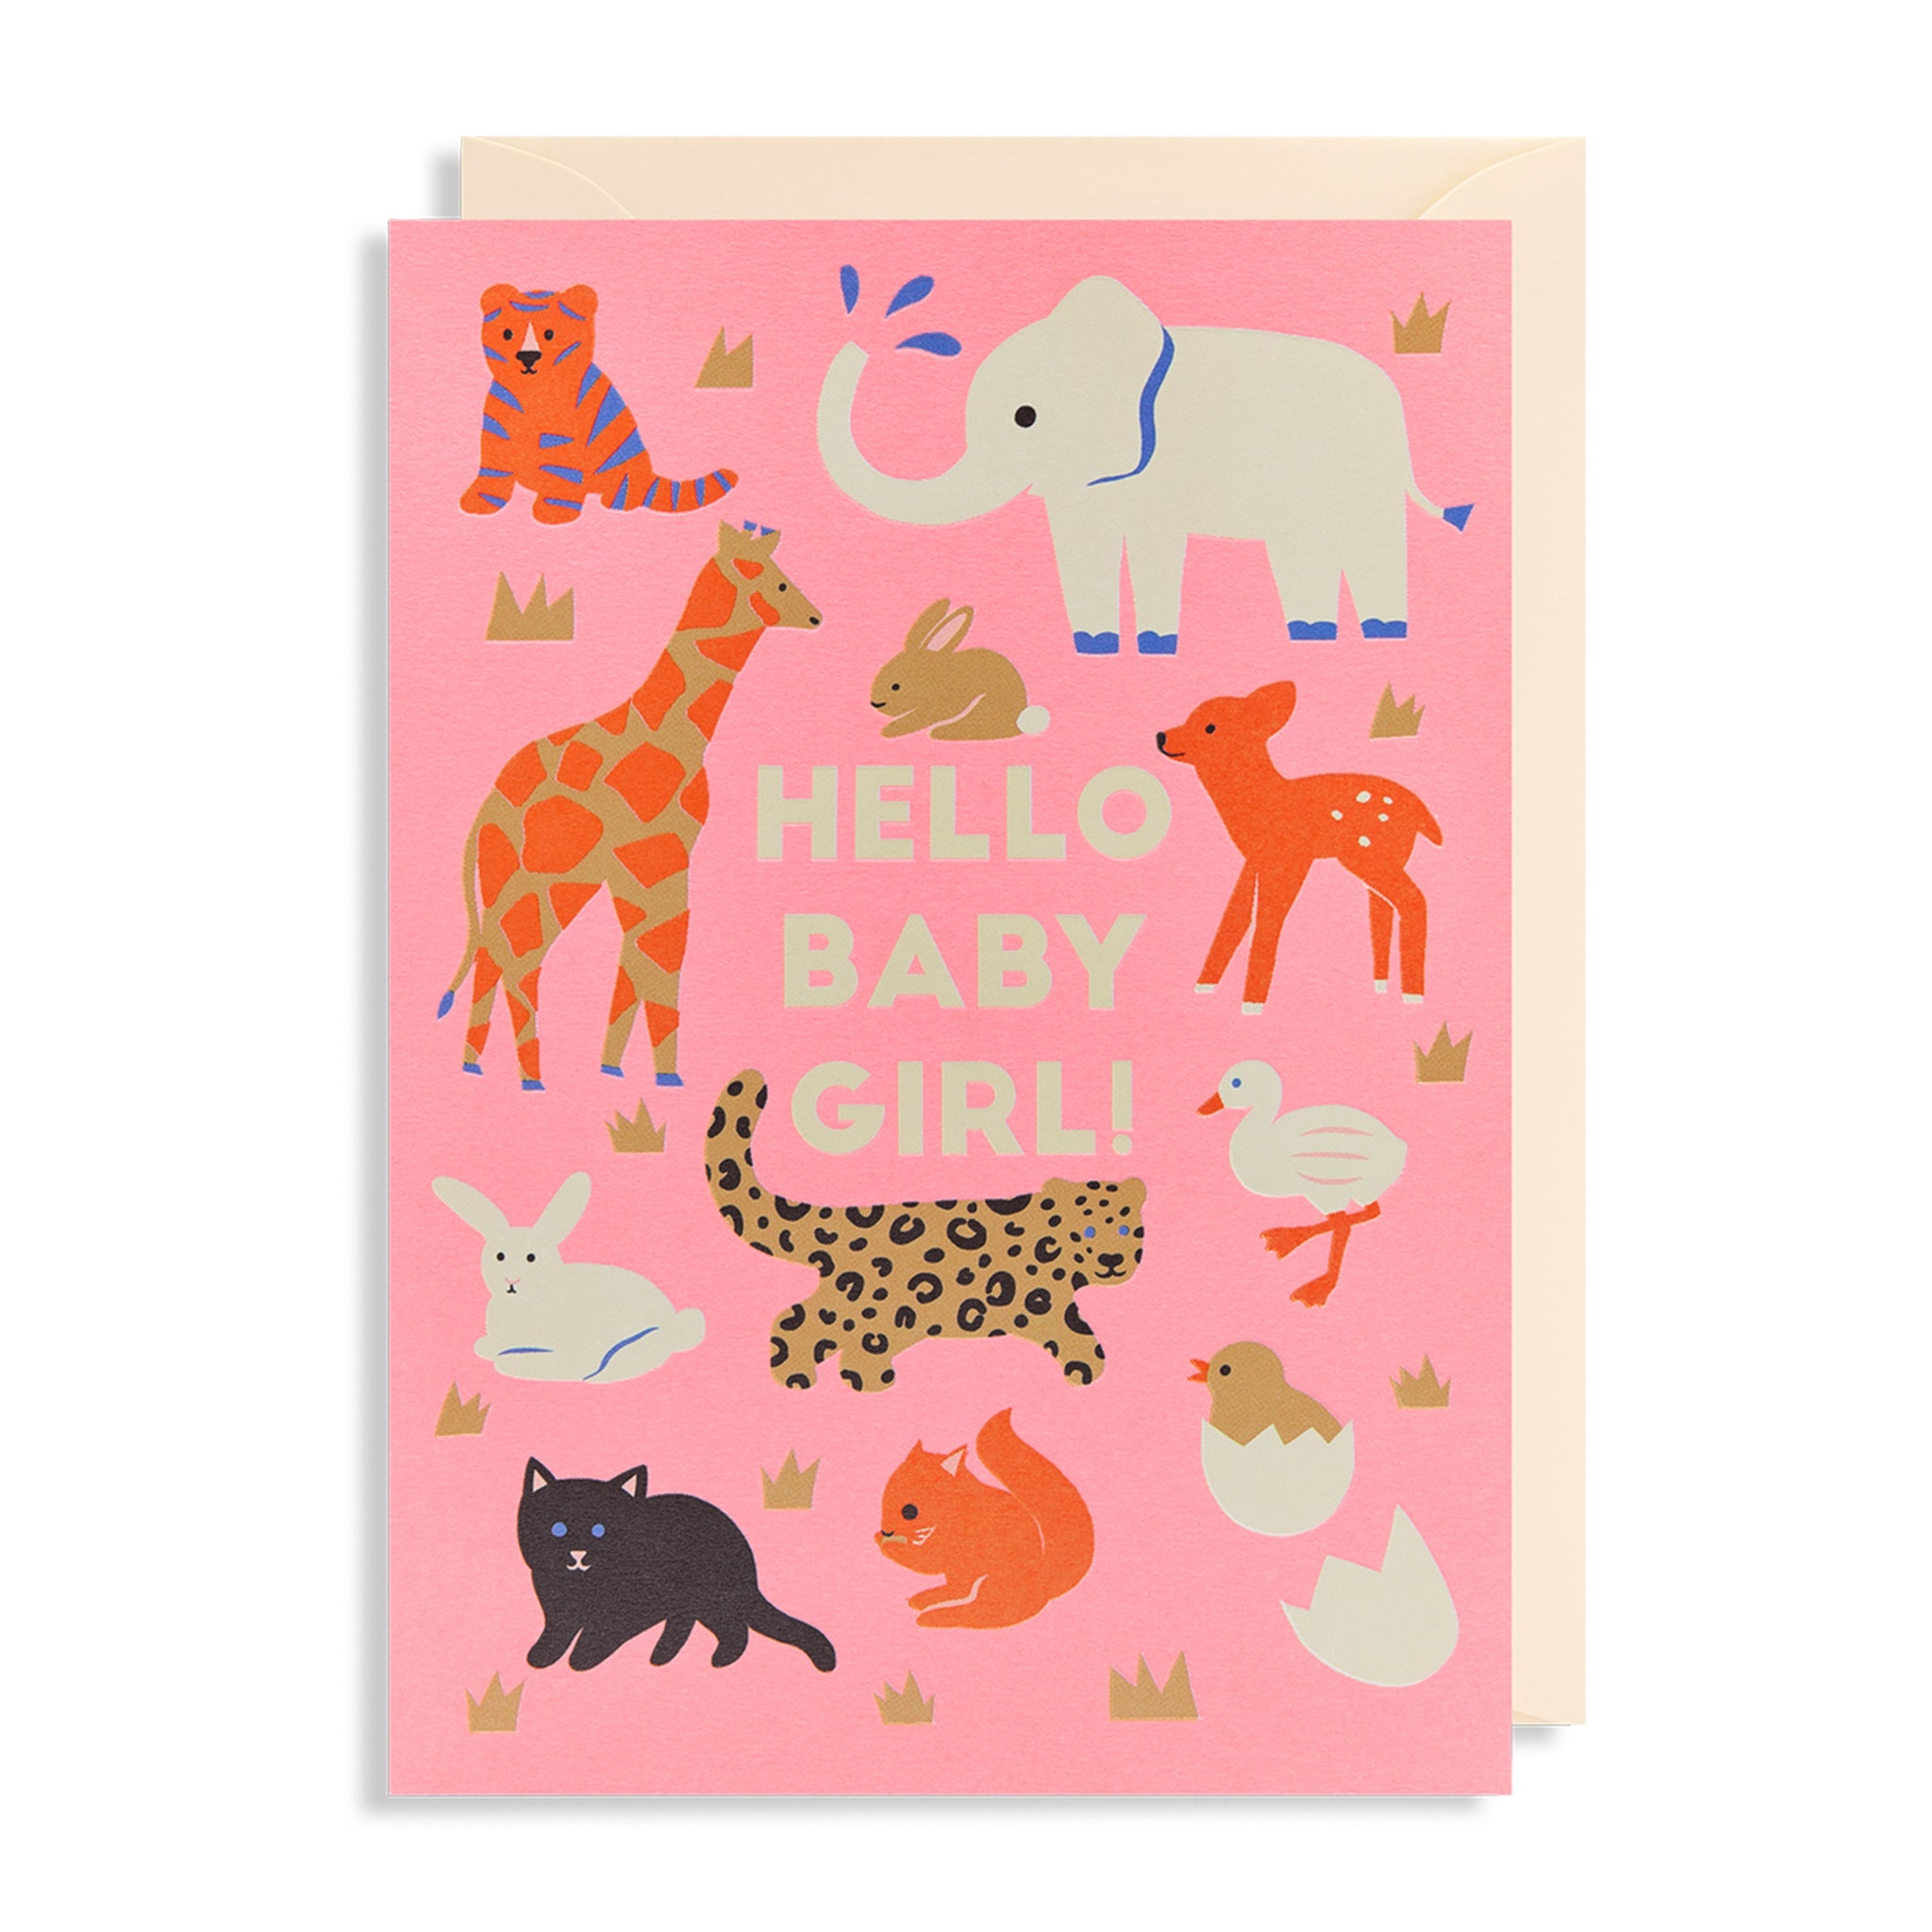 Hello Baby Girl! - Card - Five And Dime